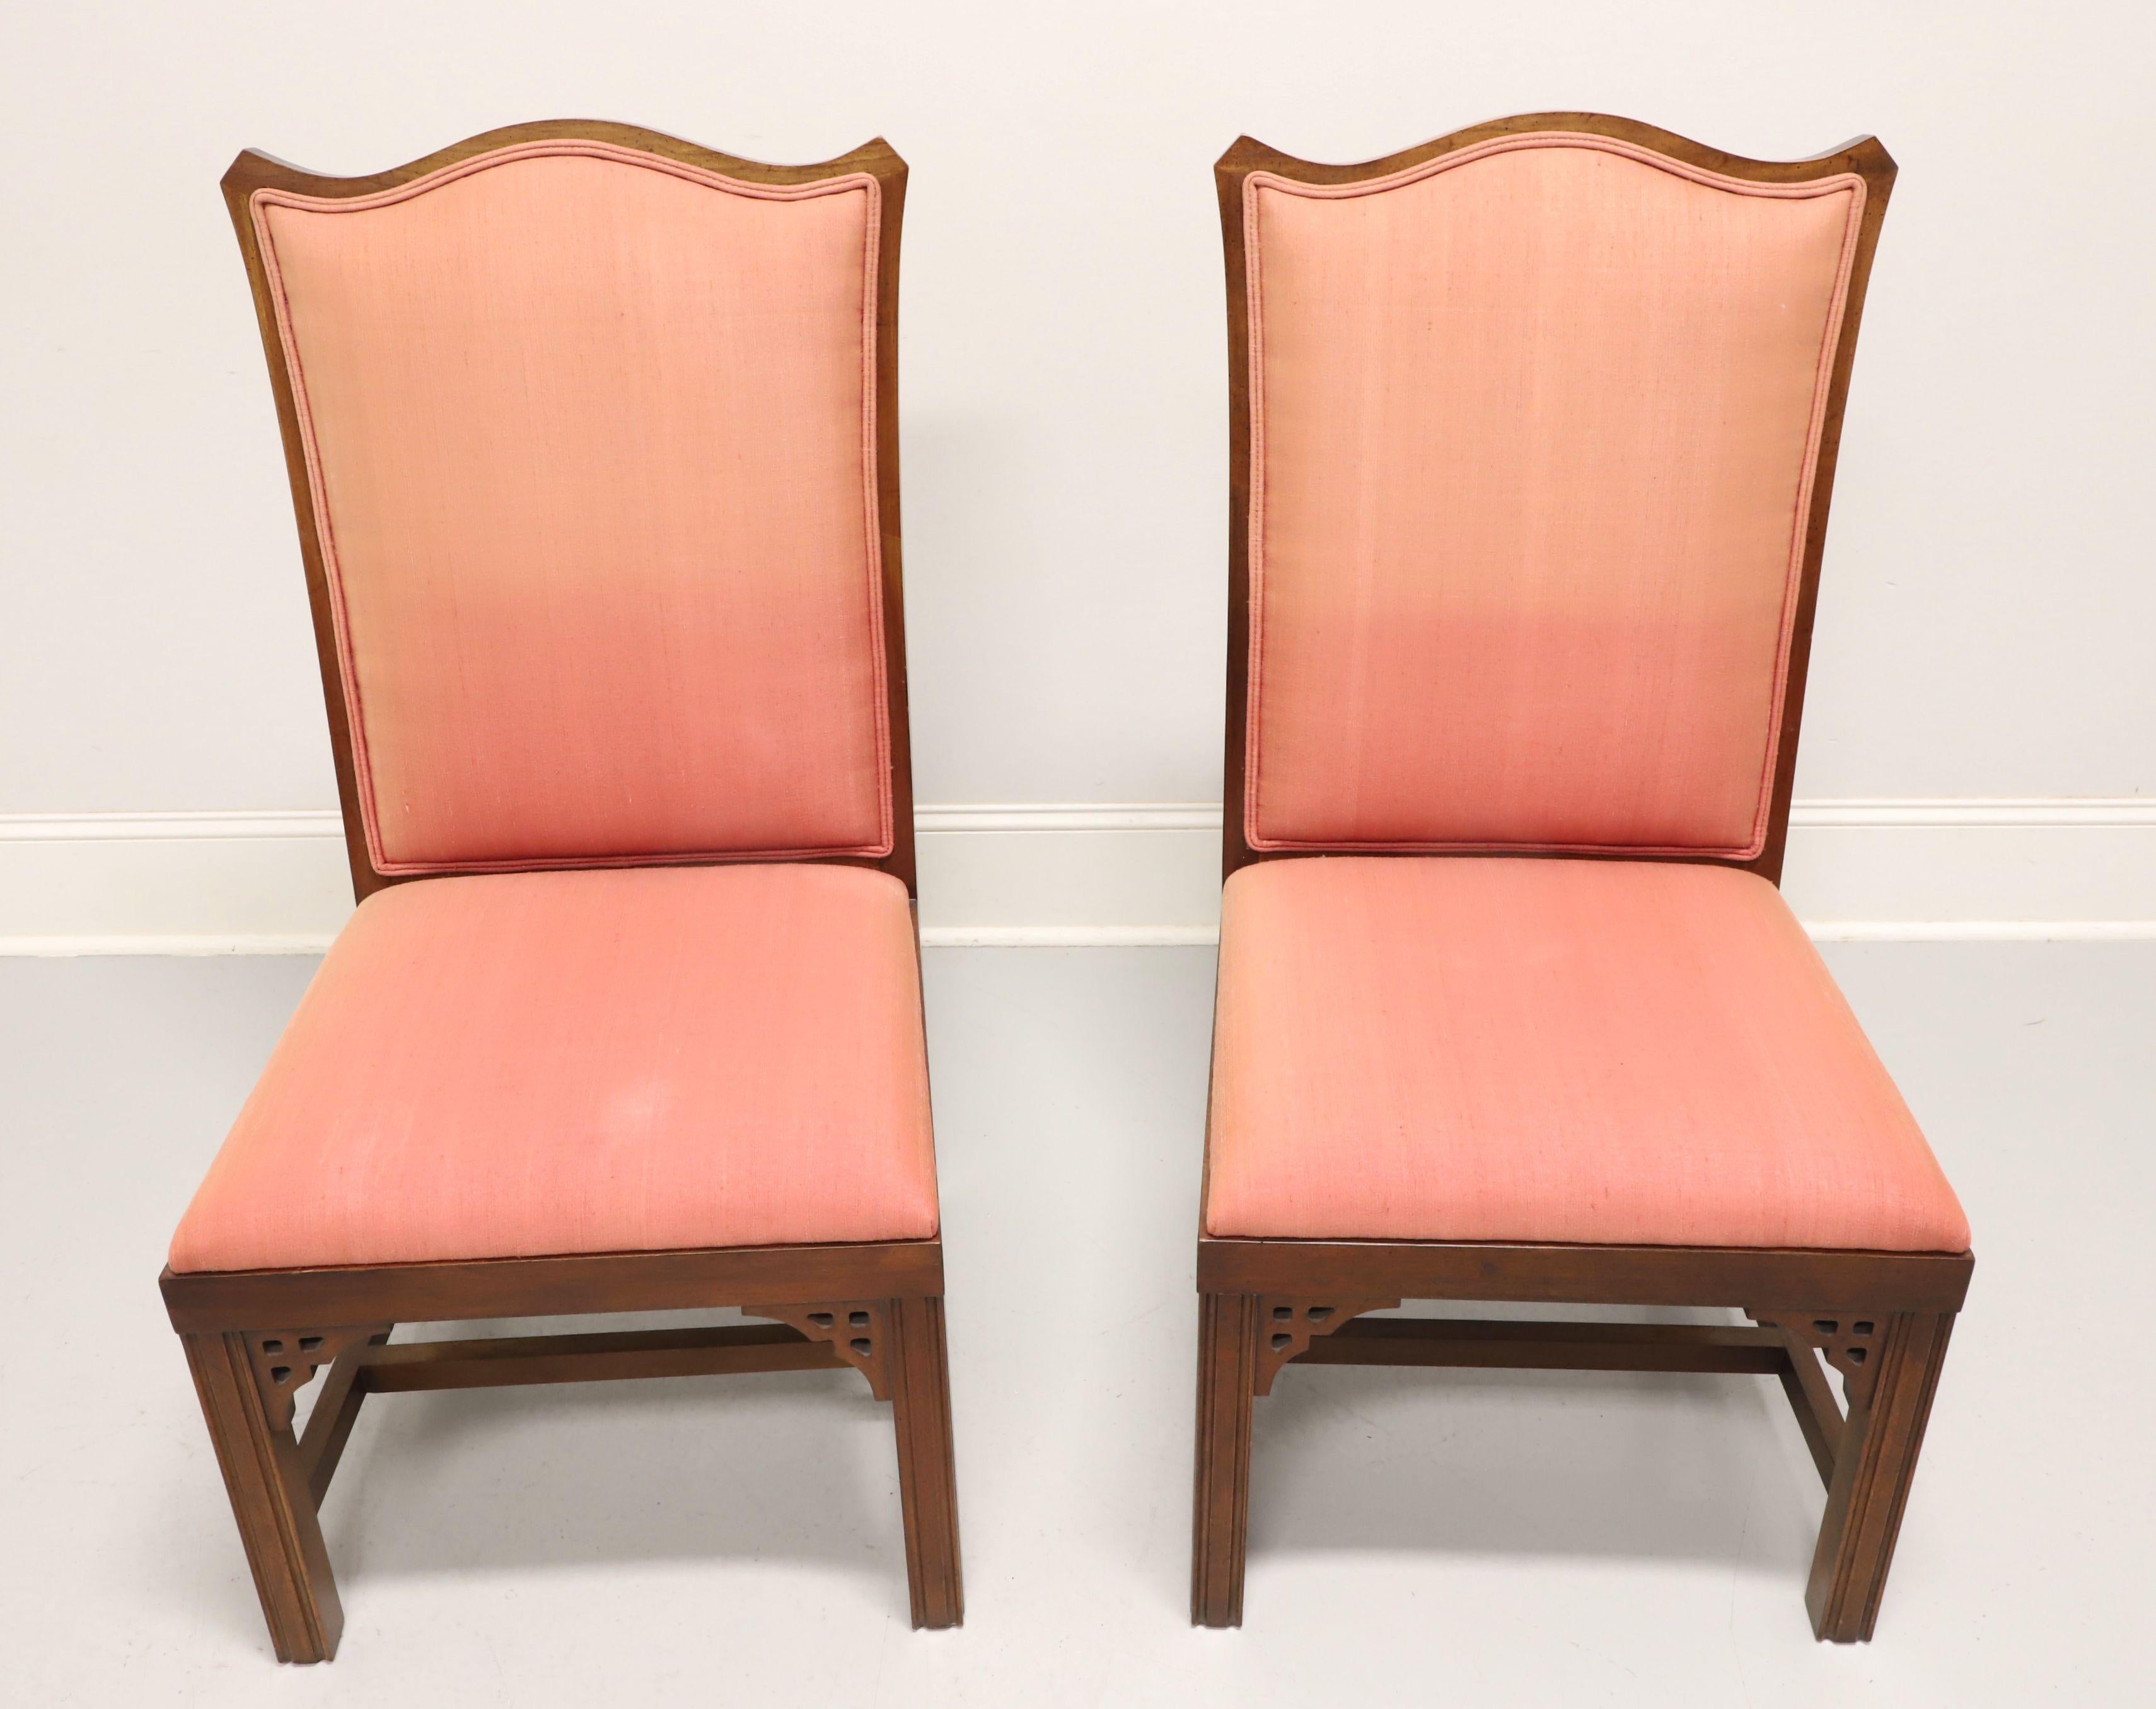 A pair of Asian inspired dining side chairs, unbranded, likely Thomasville or American of Martinsville. Cherry with decorative fretwork accents under apron at corners, carved design to chair back, salmon color fabric upholstered backrest & seat,